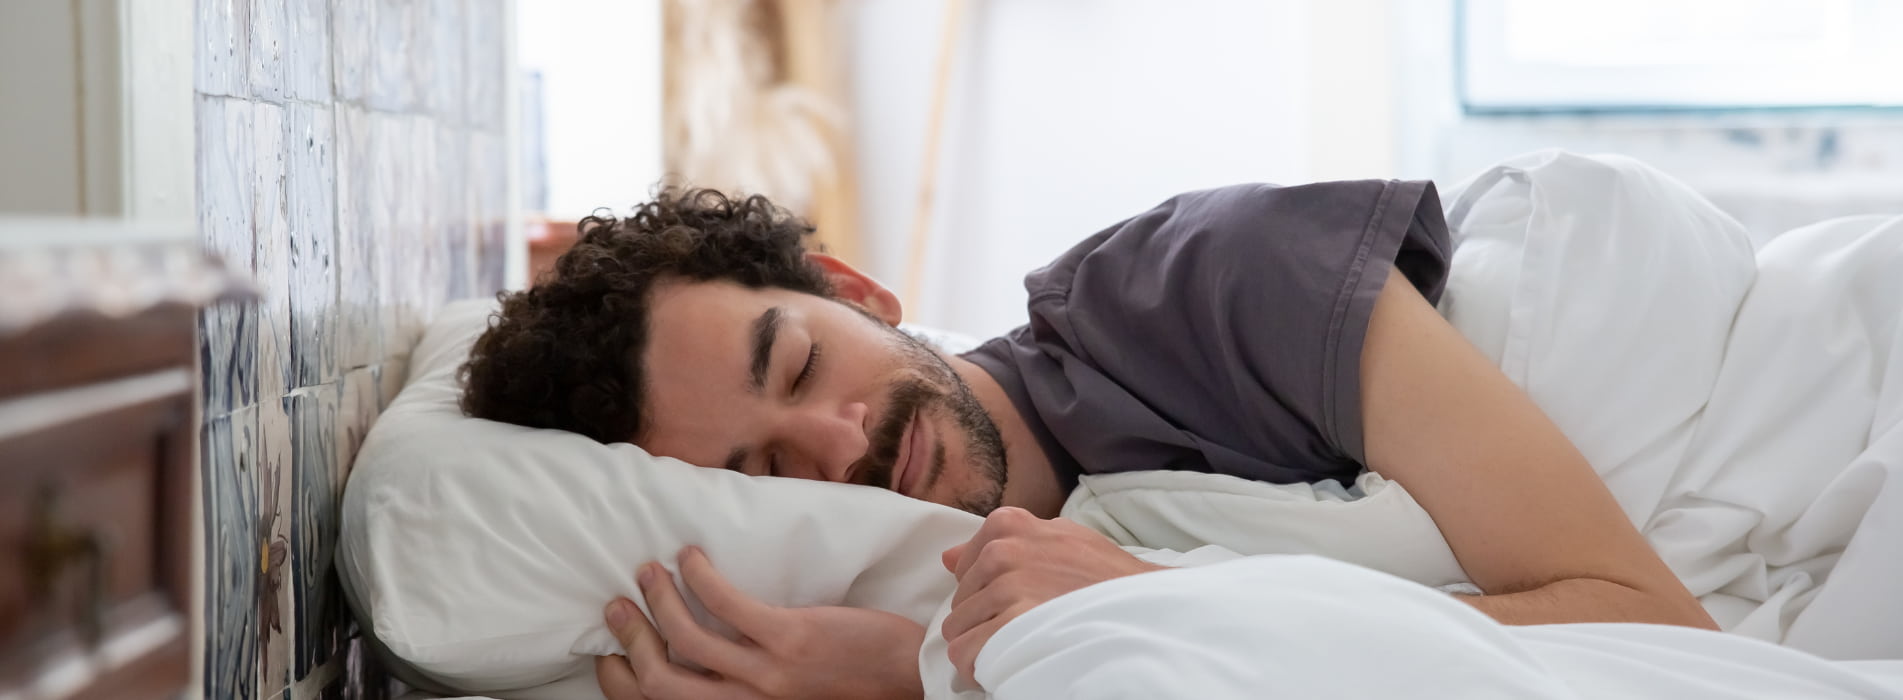 Relationship between sleep and weight loss